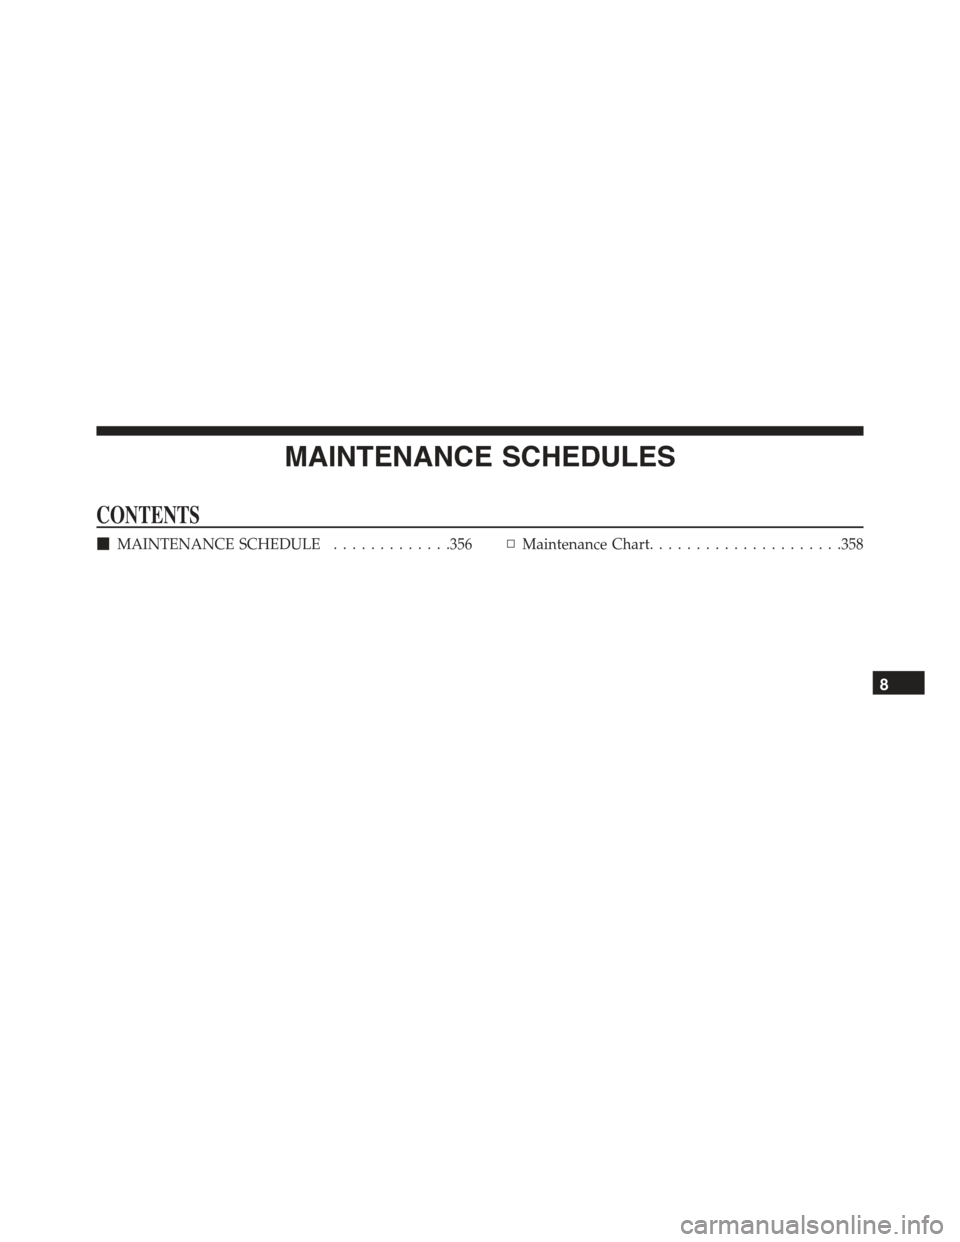 FIAT 500 ABARTH 2013 2.G Owners Manual MAINTENANCE SCHEDULES
CONTENTS
!MAINTENANCE SCHEDULE.............356▫Maintenance Chart.....................358
8 